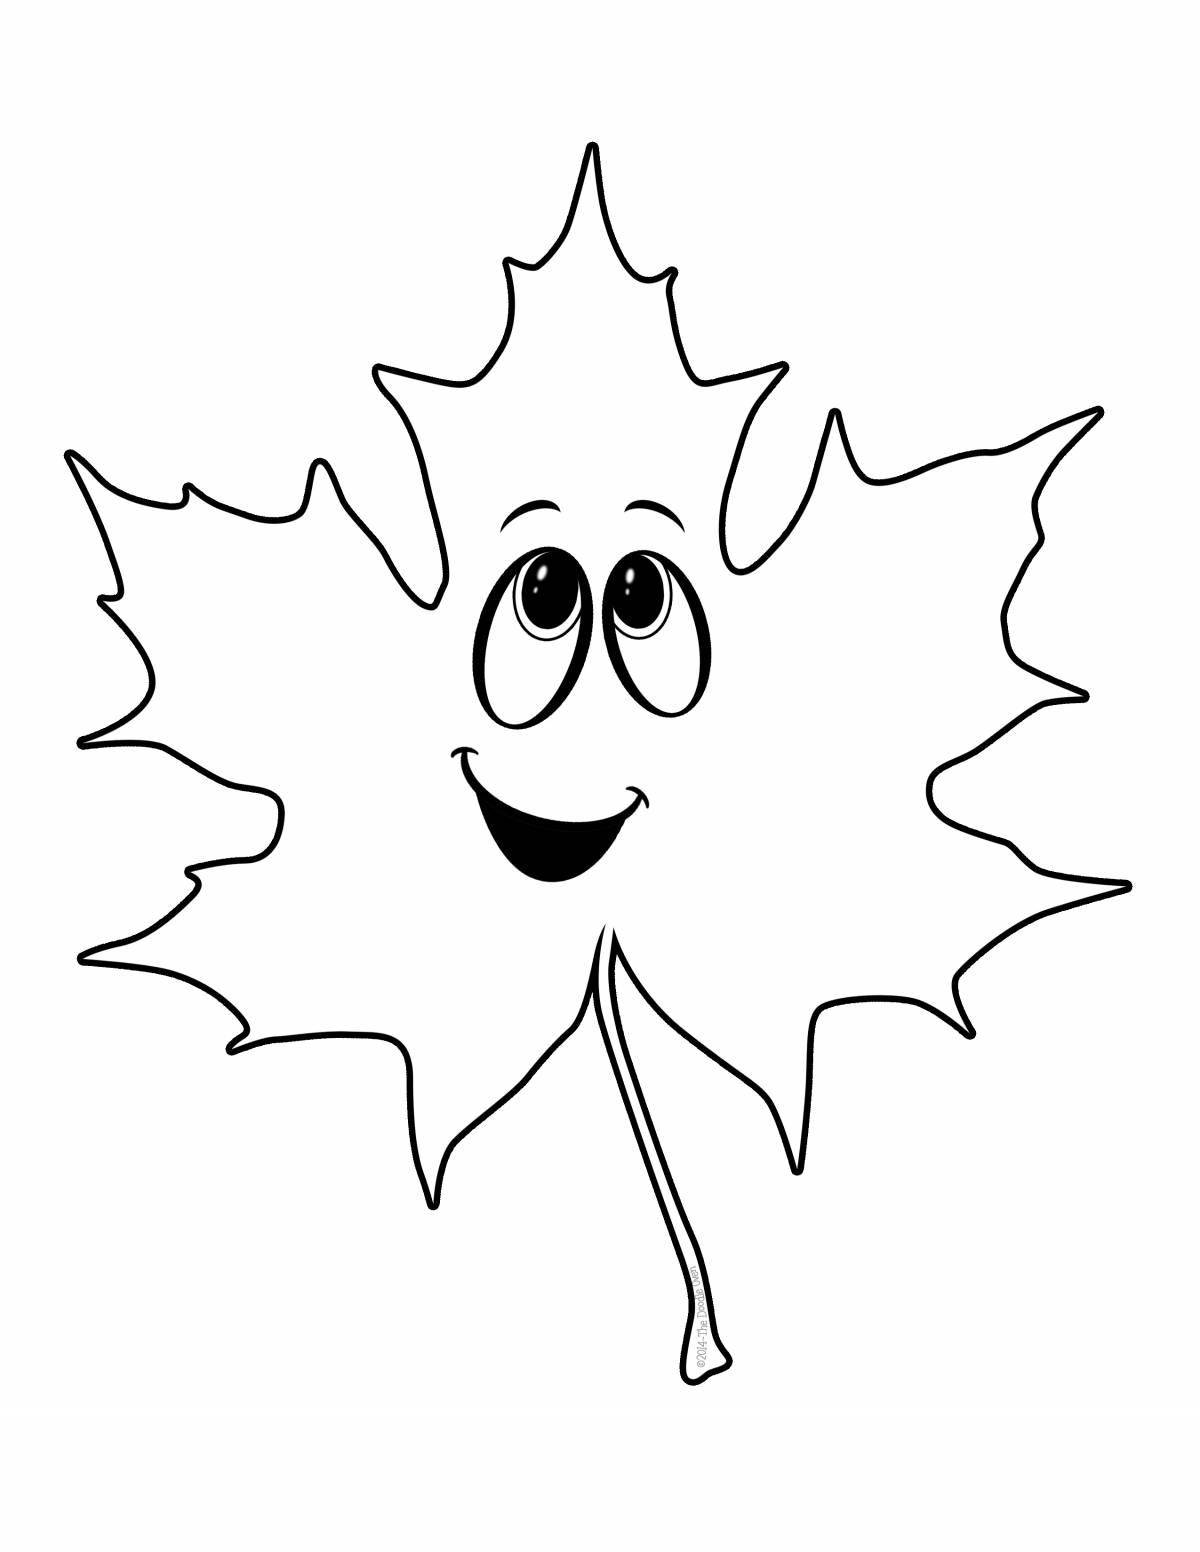 Fun maple leaf coloring book for kids